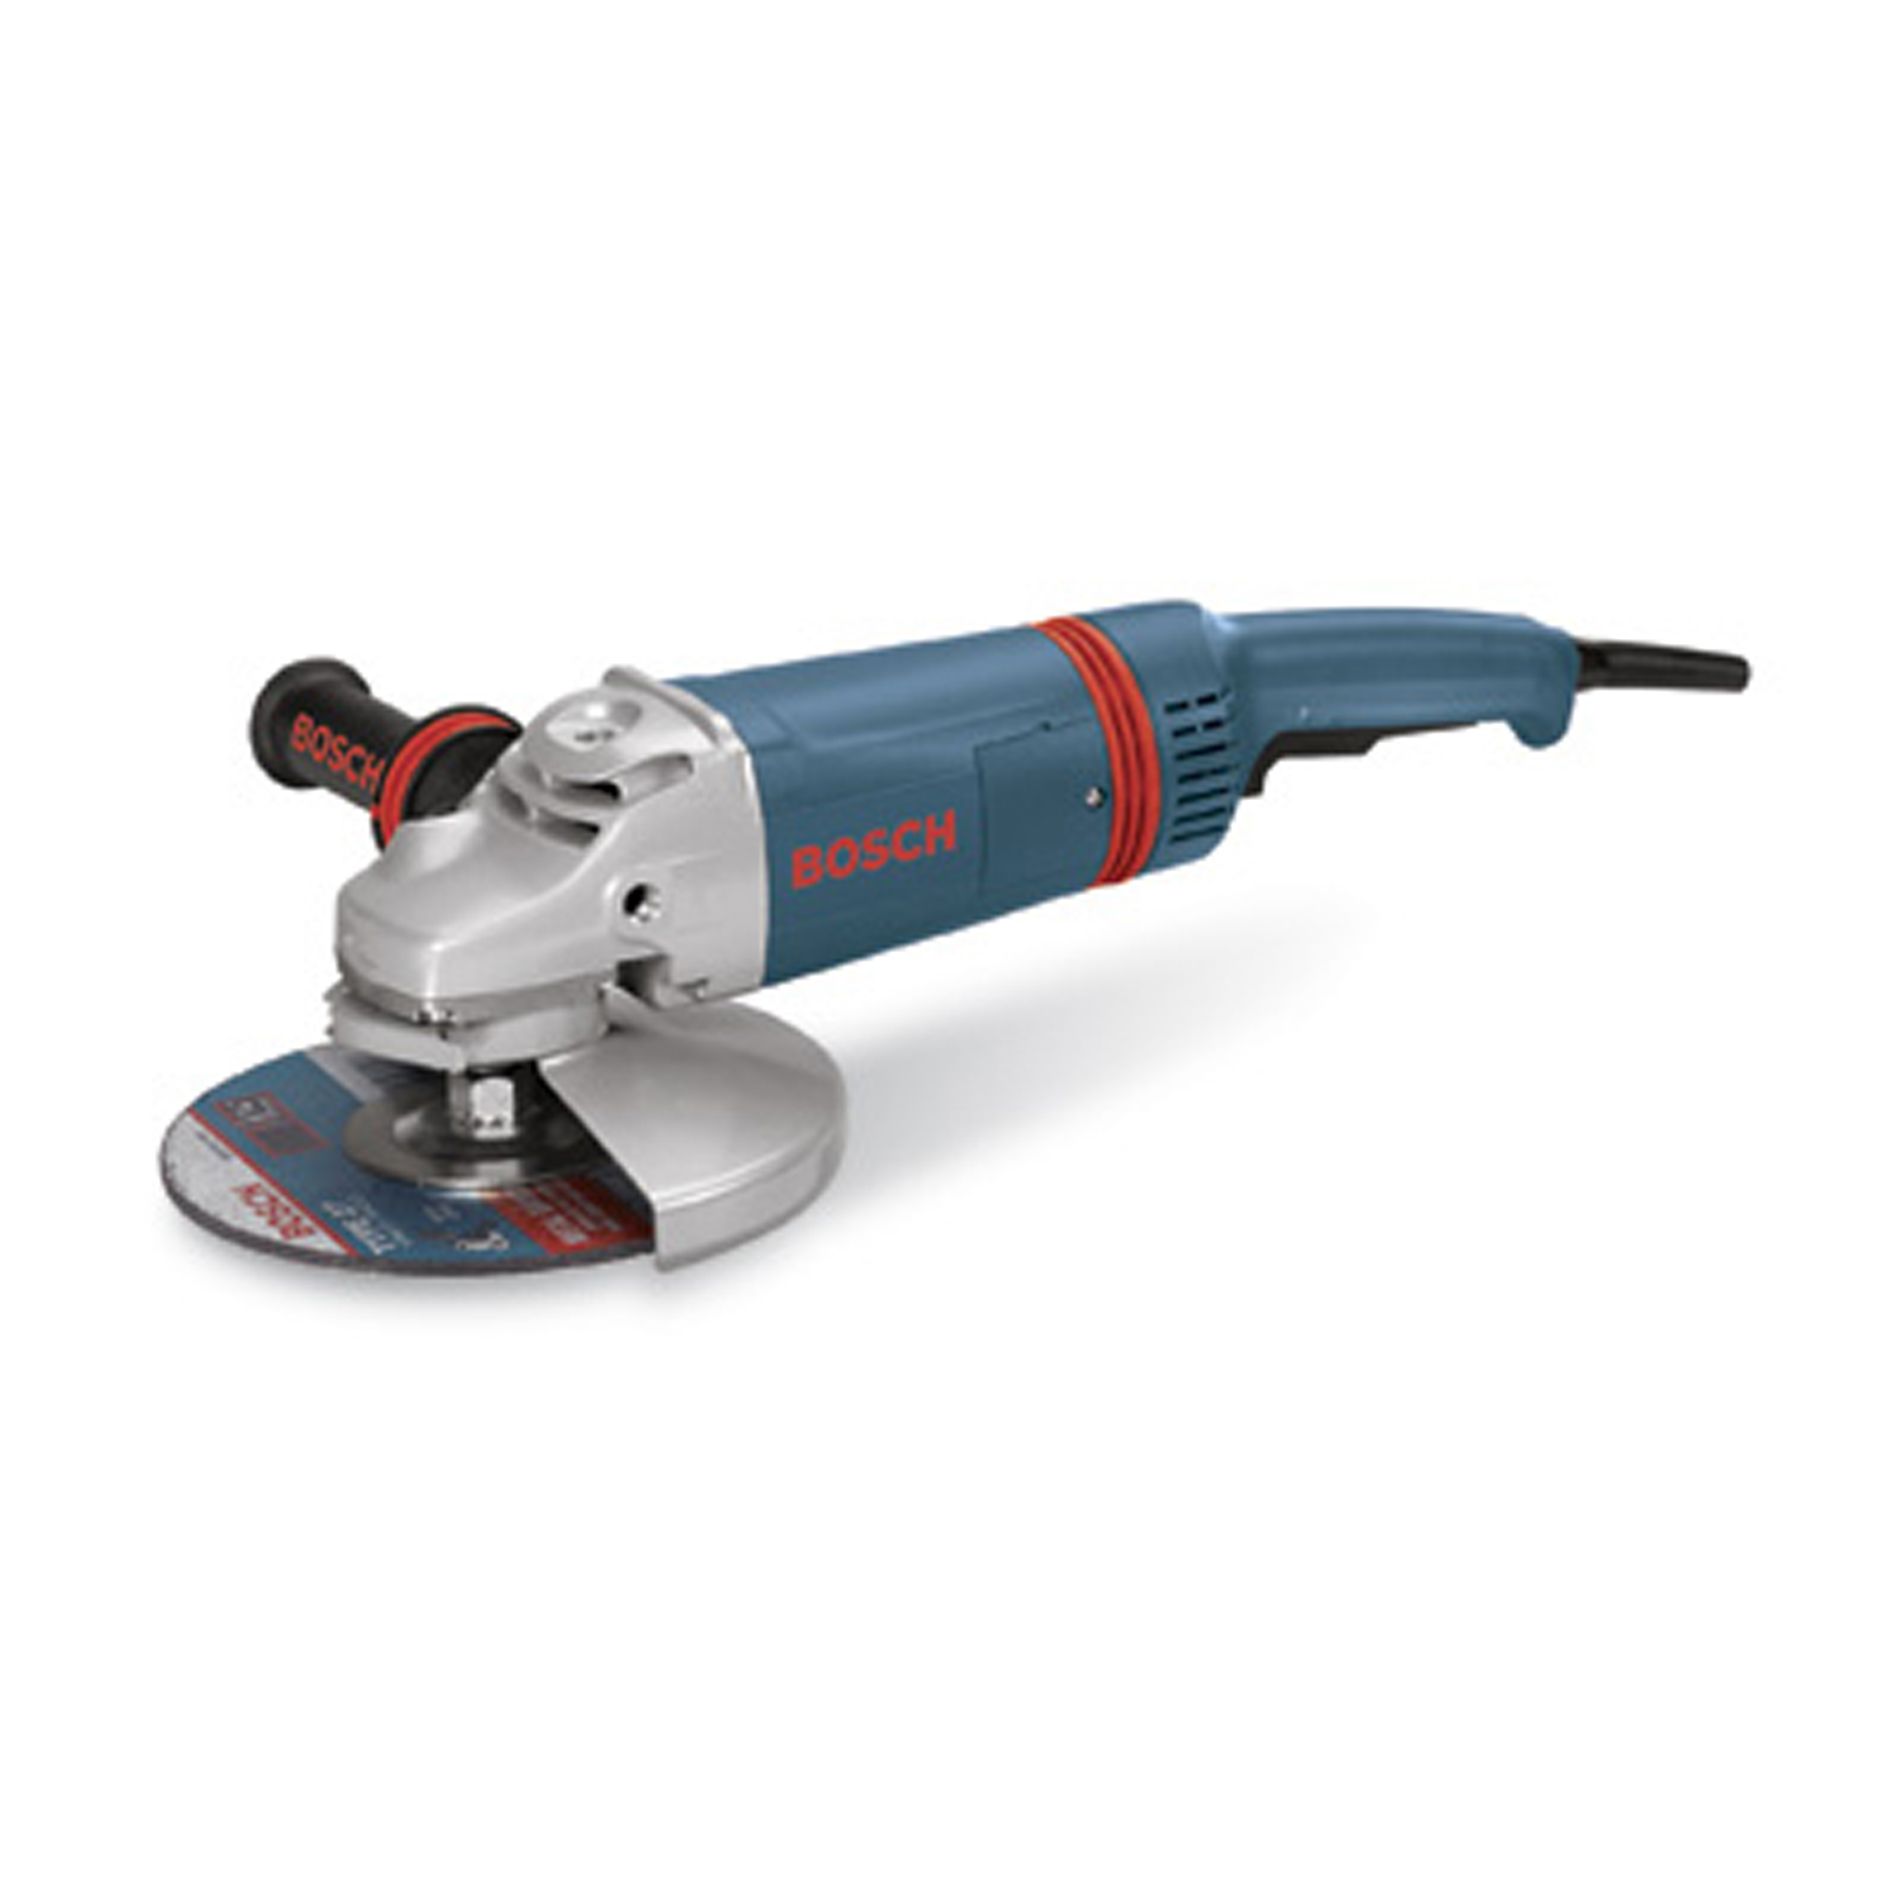 1873-8 15 amp Corded 7" Large Angle Grinder with Guard